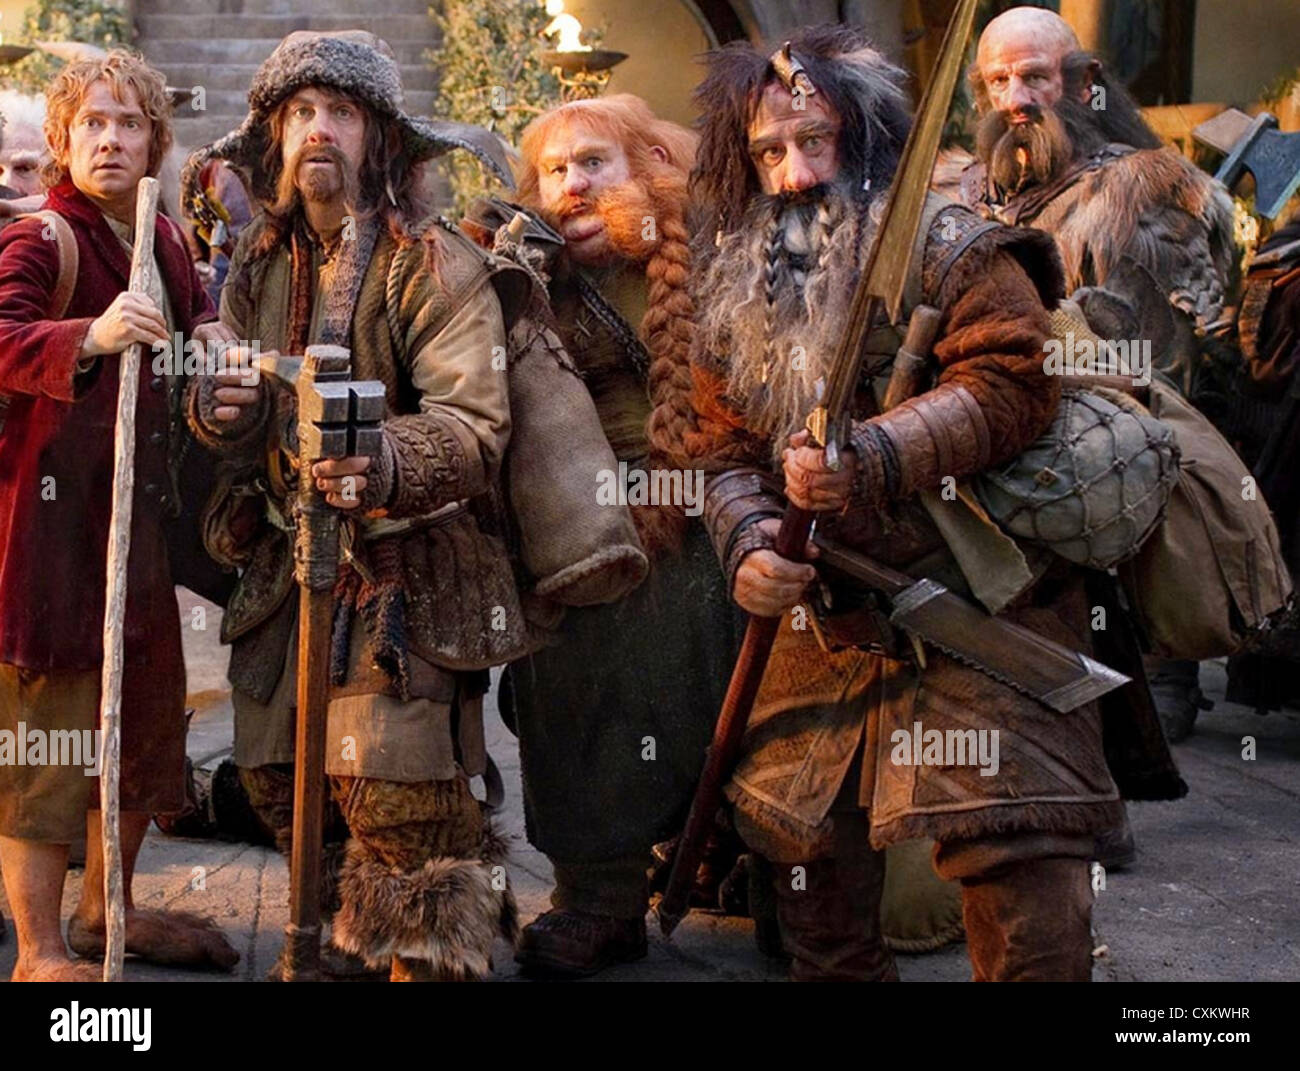 THE HOBBIT: AN UNEXPECTED JOURNEY Warner Bros Pictures 2012 film with Martin Freeman as Bilbo Baggins at left Stock Photo